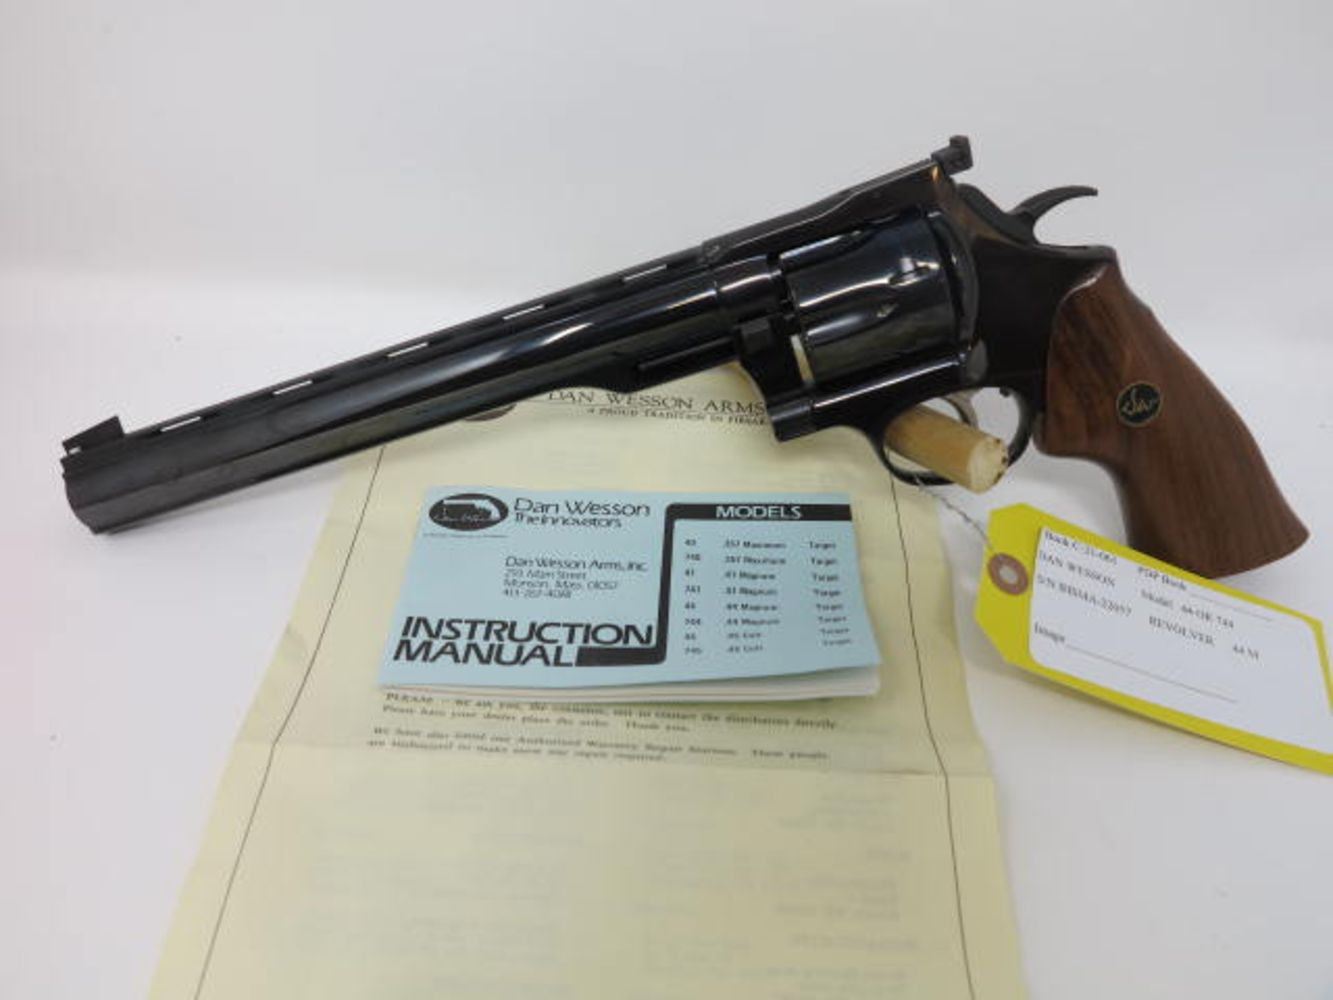 Major Firearms, Ammunition and Reloading Supplies & Equipment  Auction-All items sold ABSOLUTE